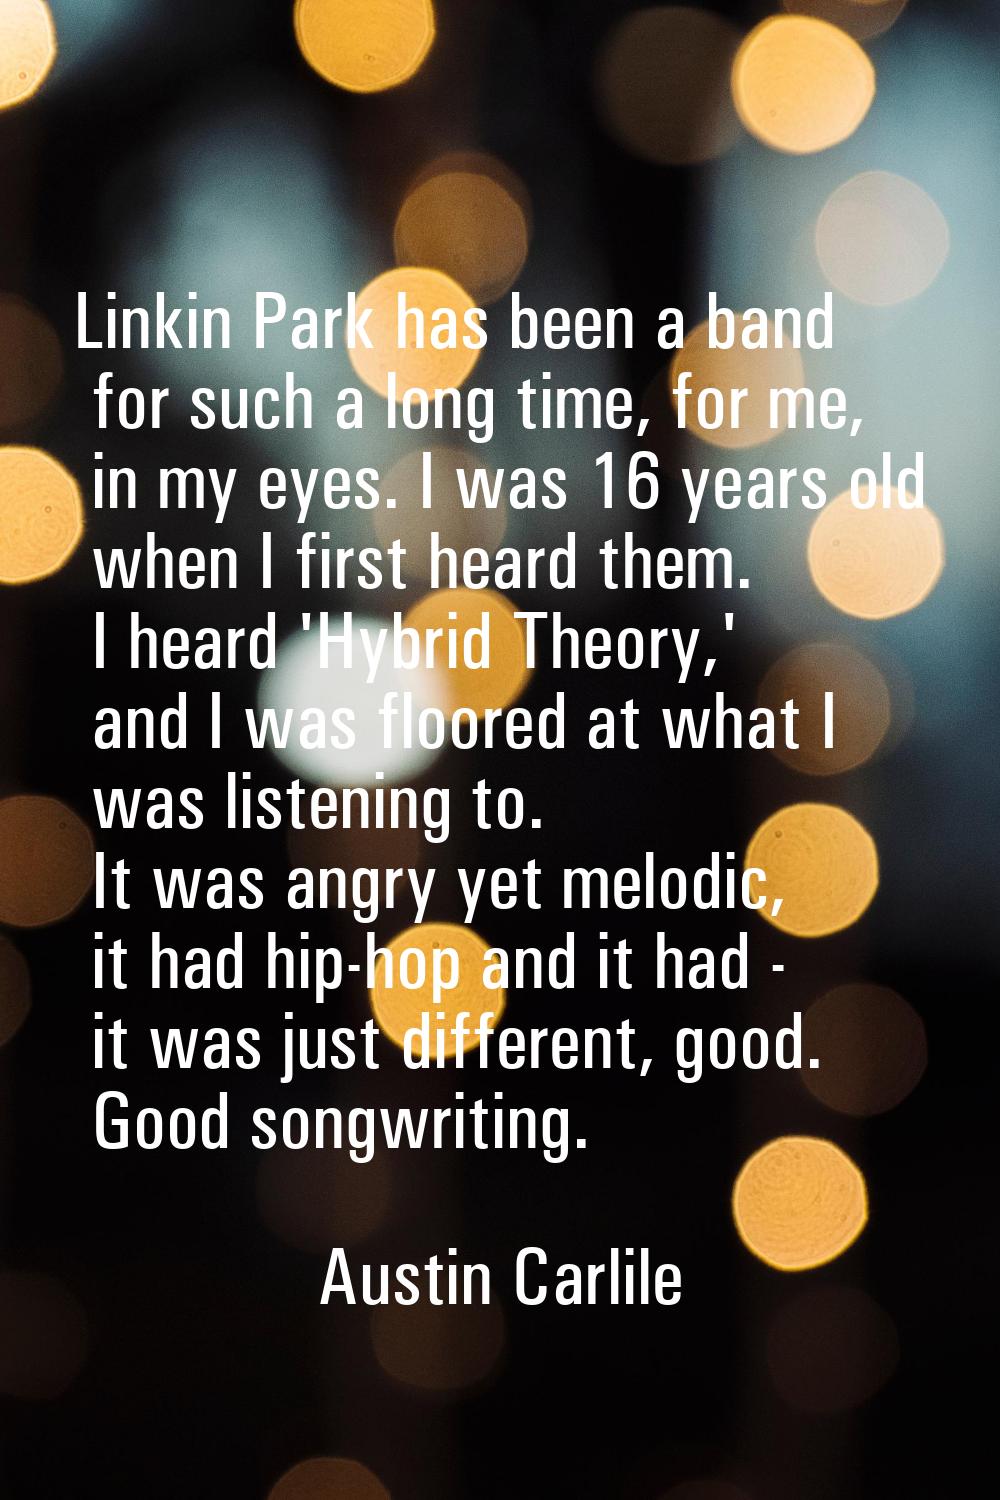 Linkin Park has been a band for such a long time, for me, in my eyes. I was 16 years old when I fir